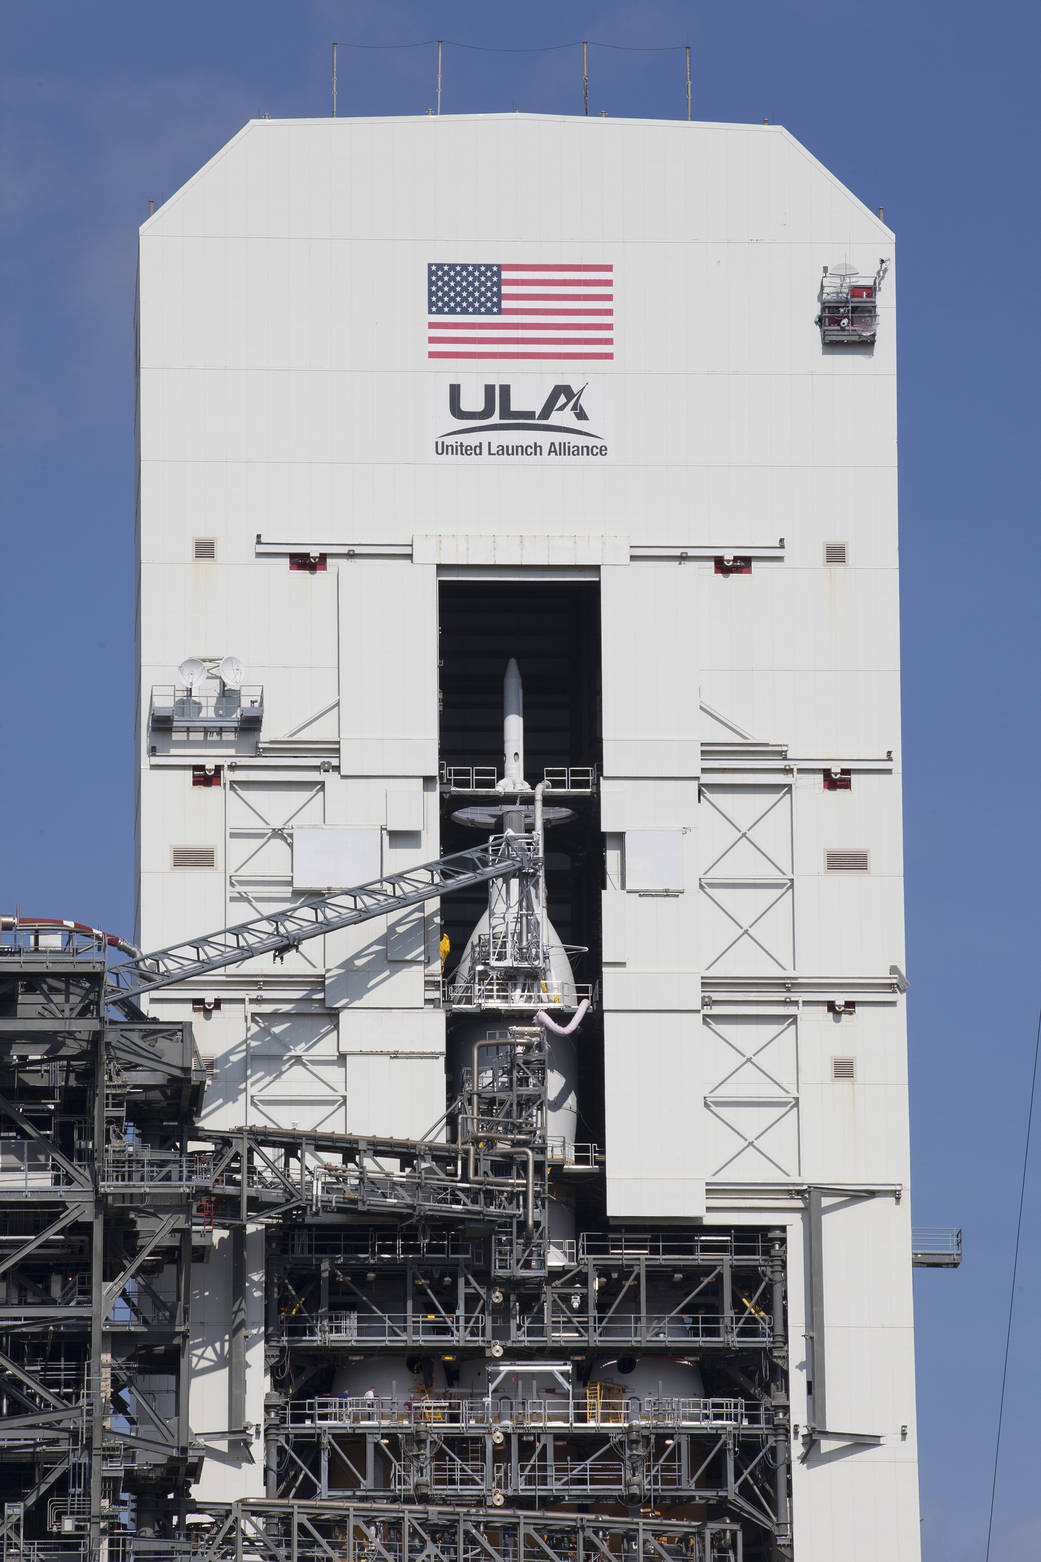 At Space Launch Complex 37, the Orion and Delta IV Heavy stack is visible in its entirety inside the Mobile Service Tower